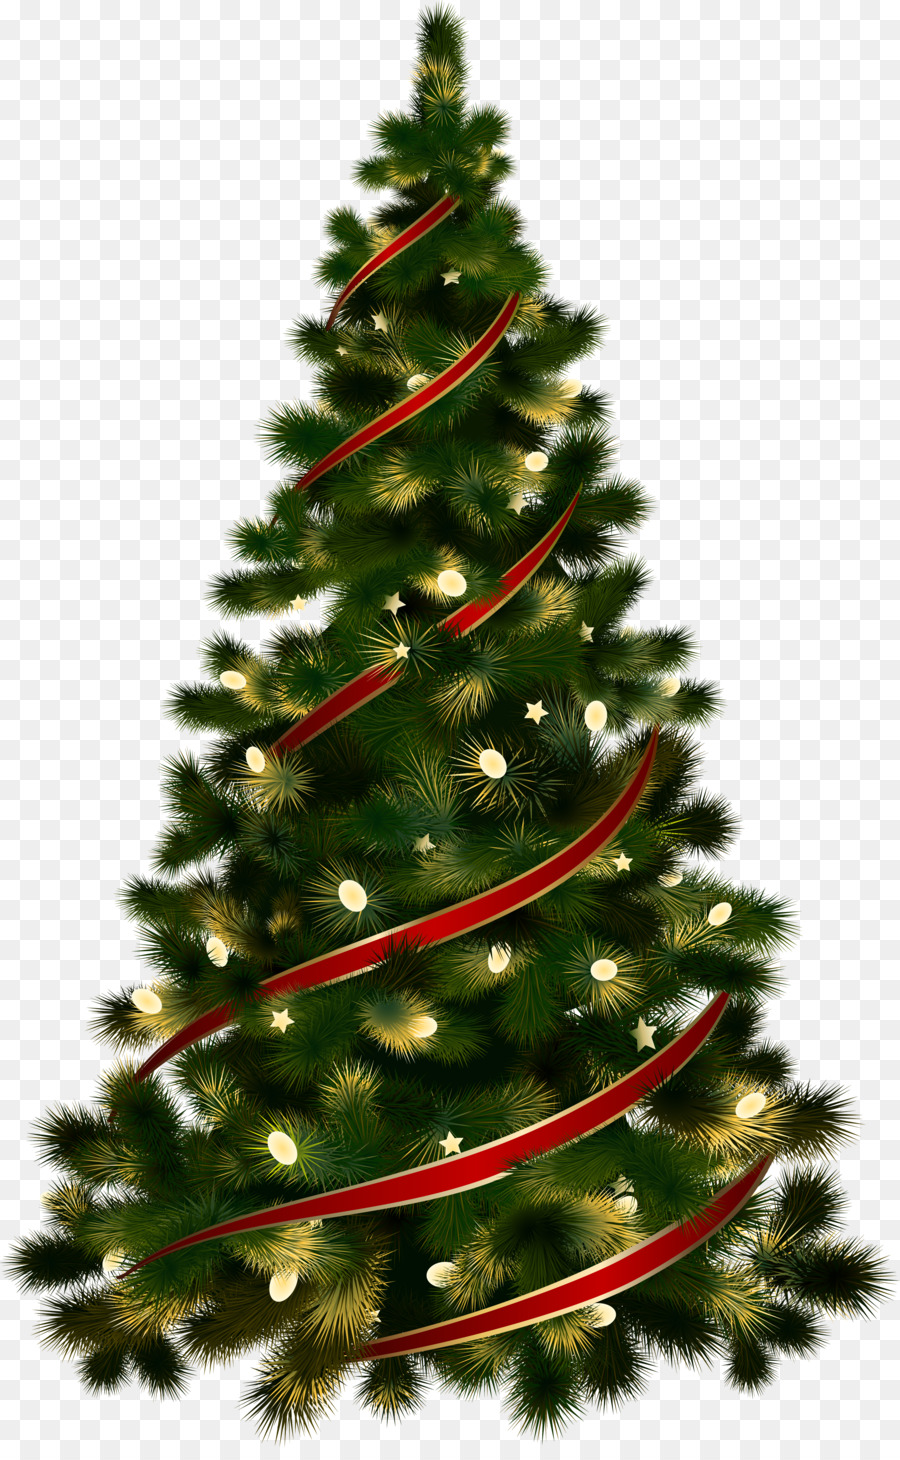 Candy cane Christmas tree Christmas ornament Clip art - icicles png download - 2778*4465 - Free Transparent Candy Cane png Download.